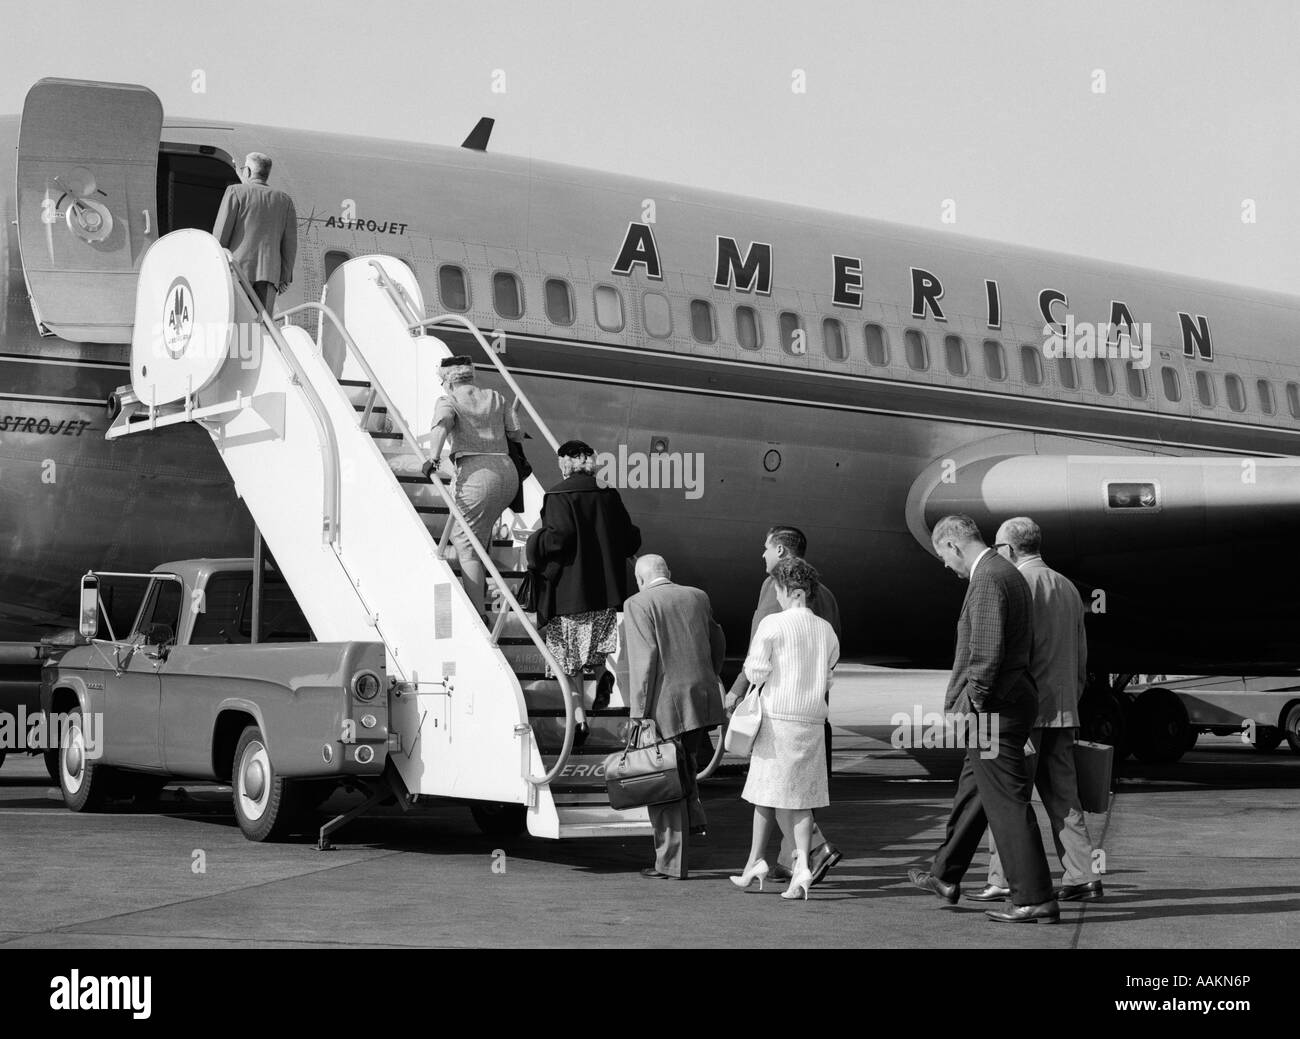 1960s PASSENGERS BOARDING AMERICAN AIRLINES ASTROJET BY WAY OF SHORT STAIRWAY RAISED FROM BED OF PICKUP TRUCK Stock Photo